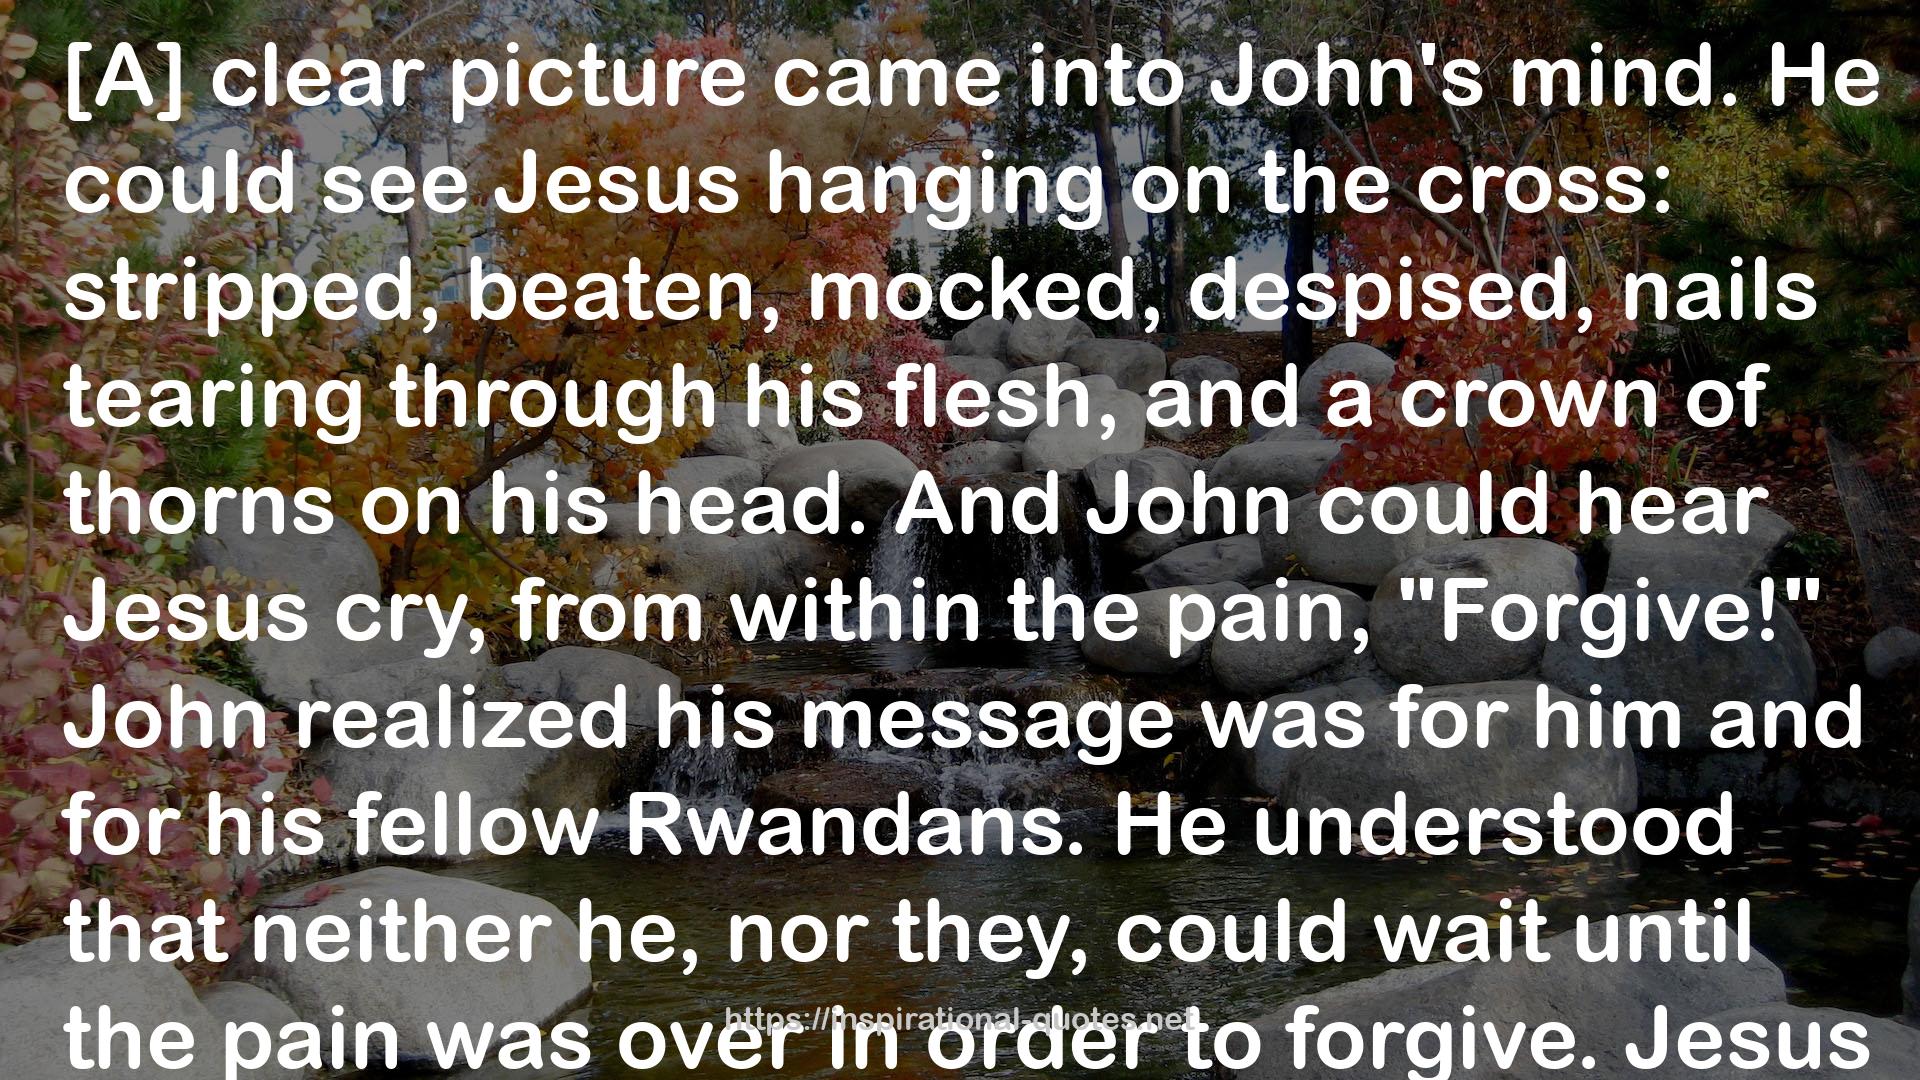 As We Forgive: Stories of Reconciliation from Rwanda QUOTES